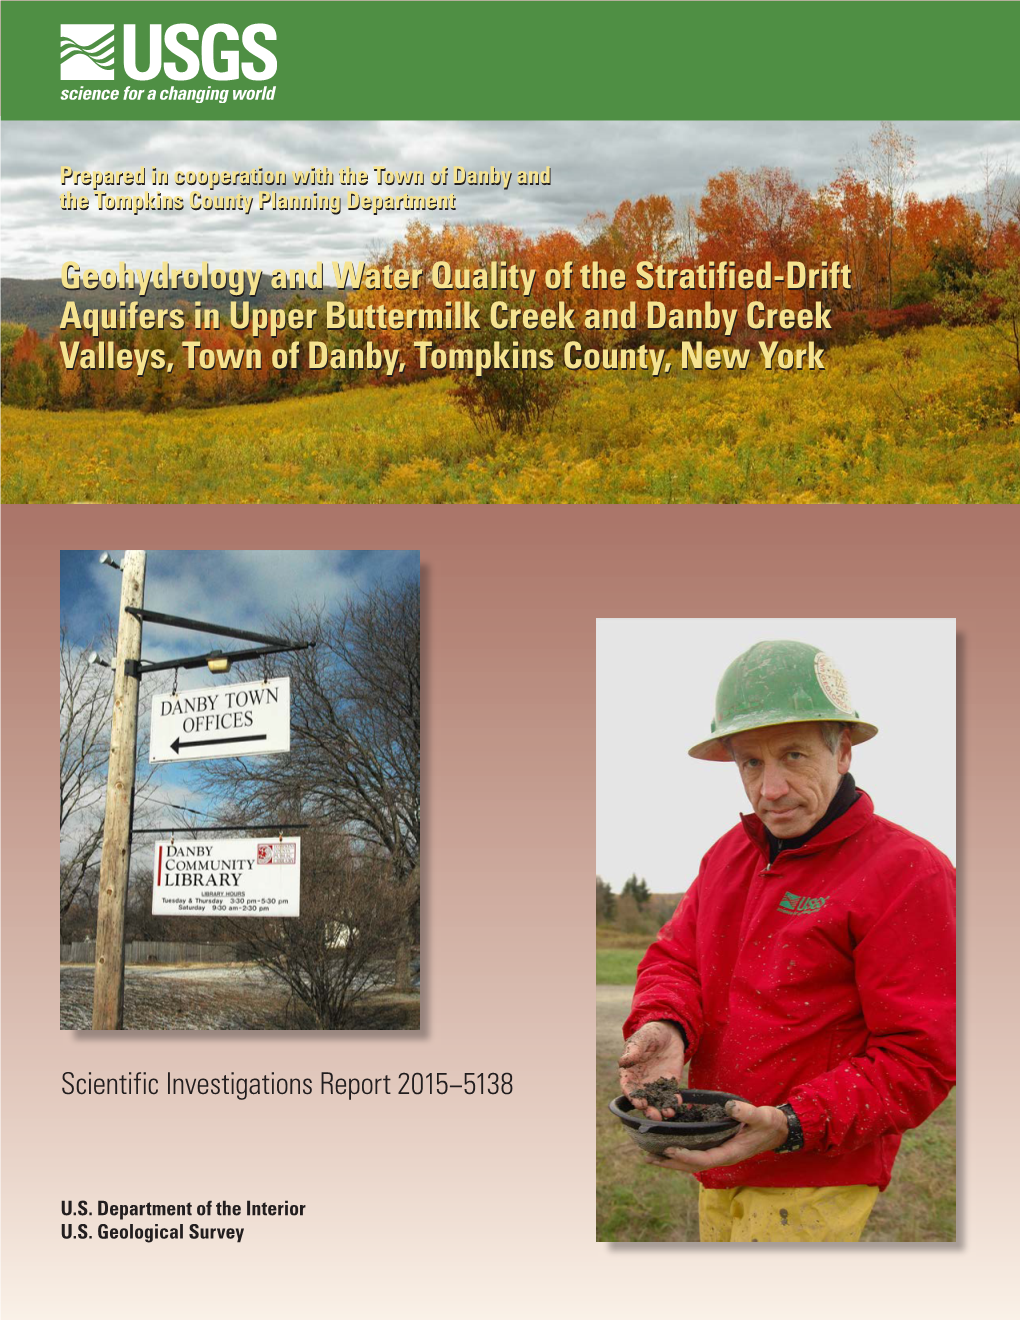 Geohydrology and Water Quality of the Stratified-Drift Aquifers in Upper Buttermilk Creek and Danby Creek Valleys, Town of Danby, Tompkins County, New York